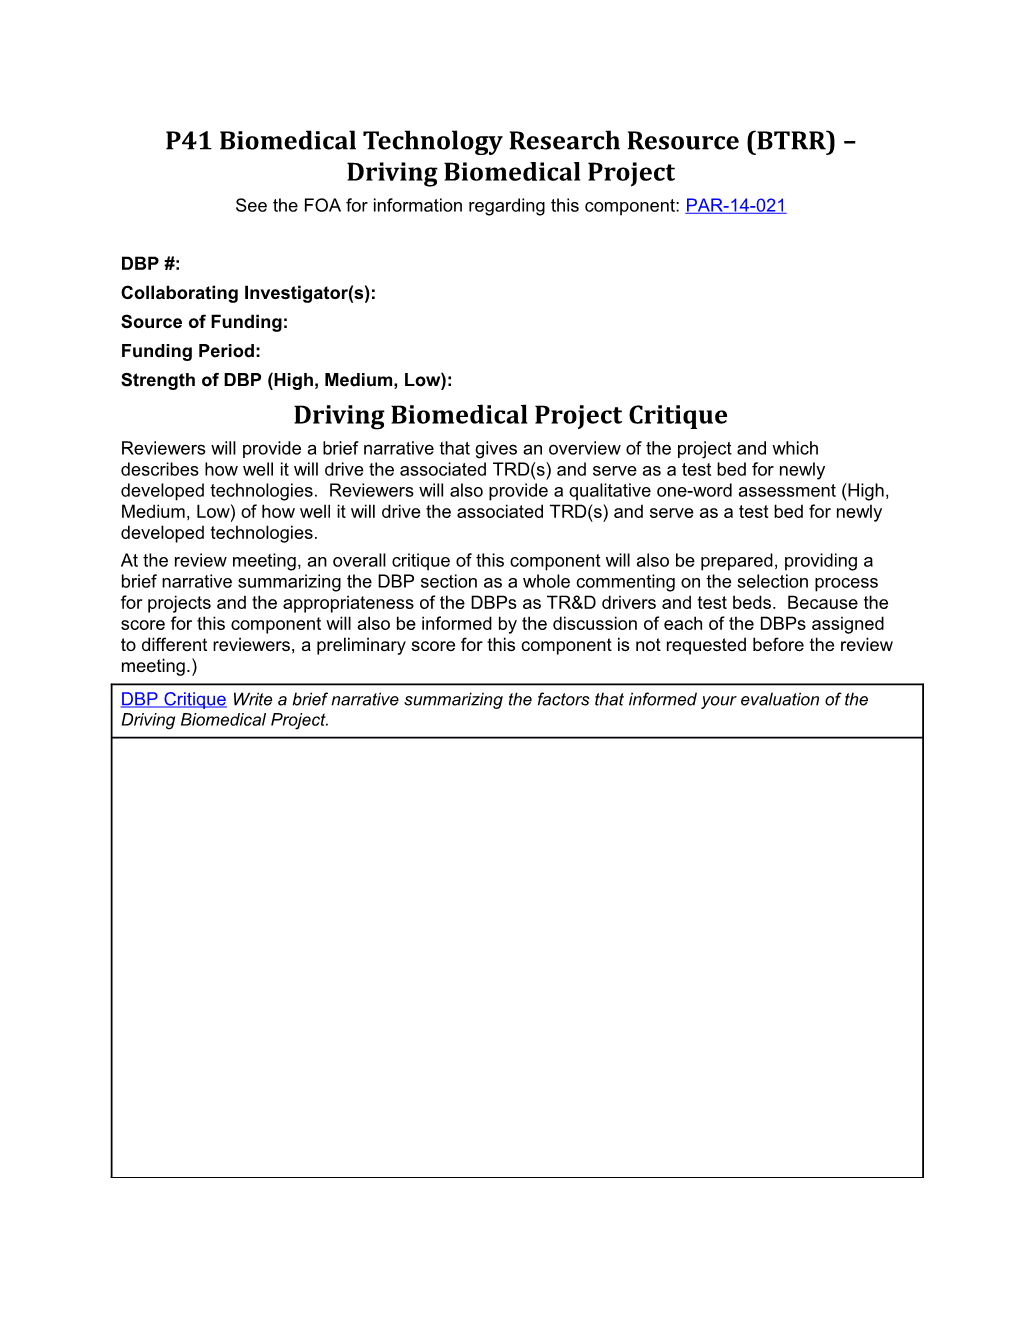 P41 Driving Biomedical Project Critique Template